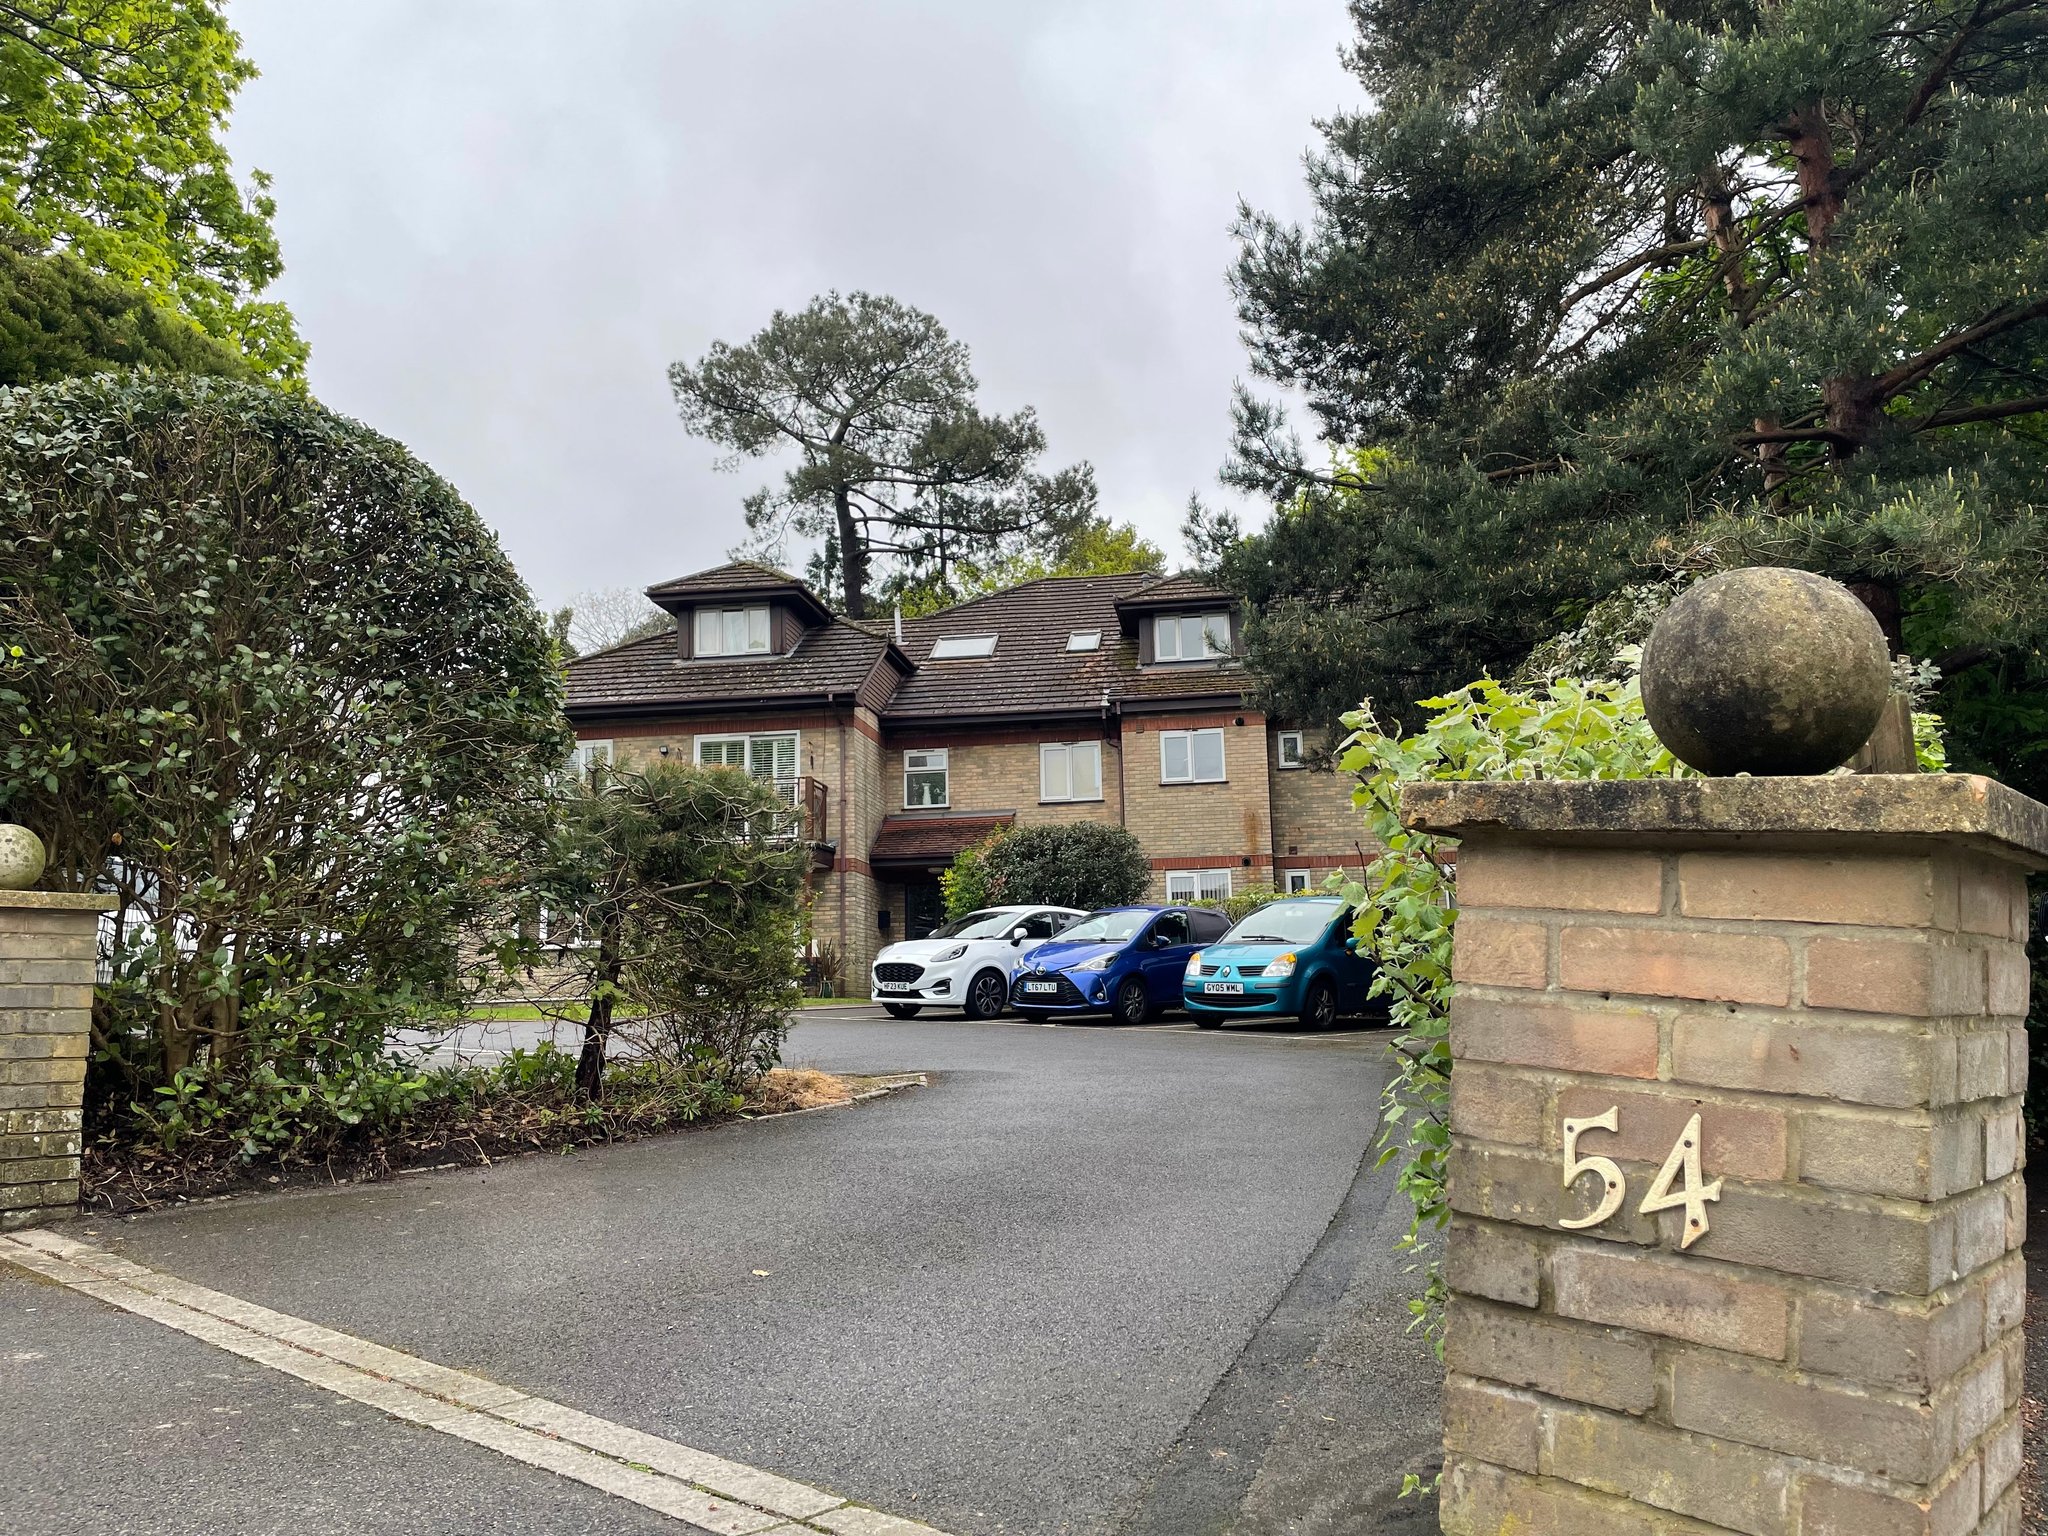 54 Bournemouth Road, Lower Parkstone, Poole